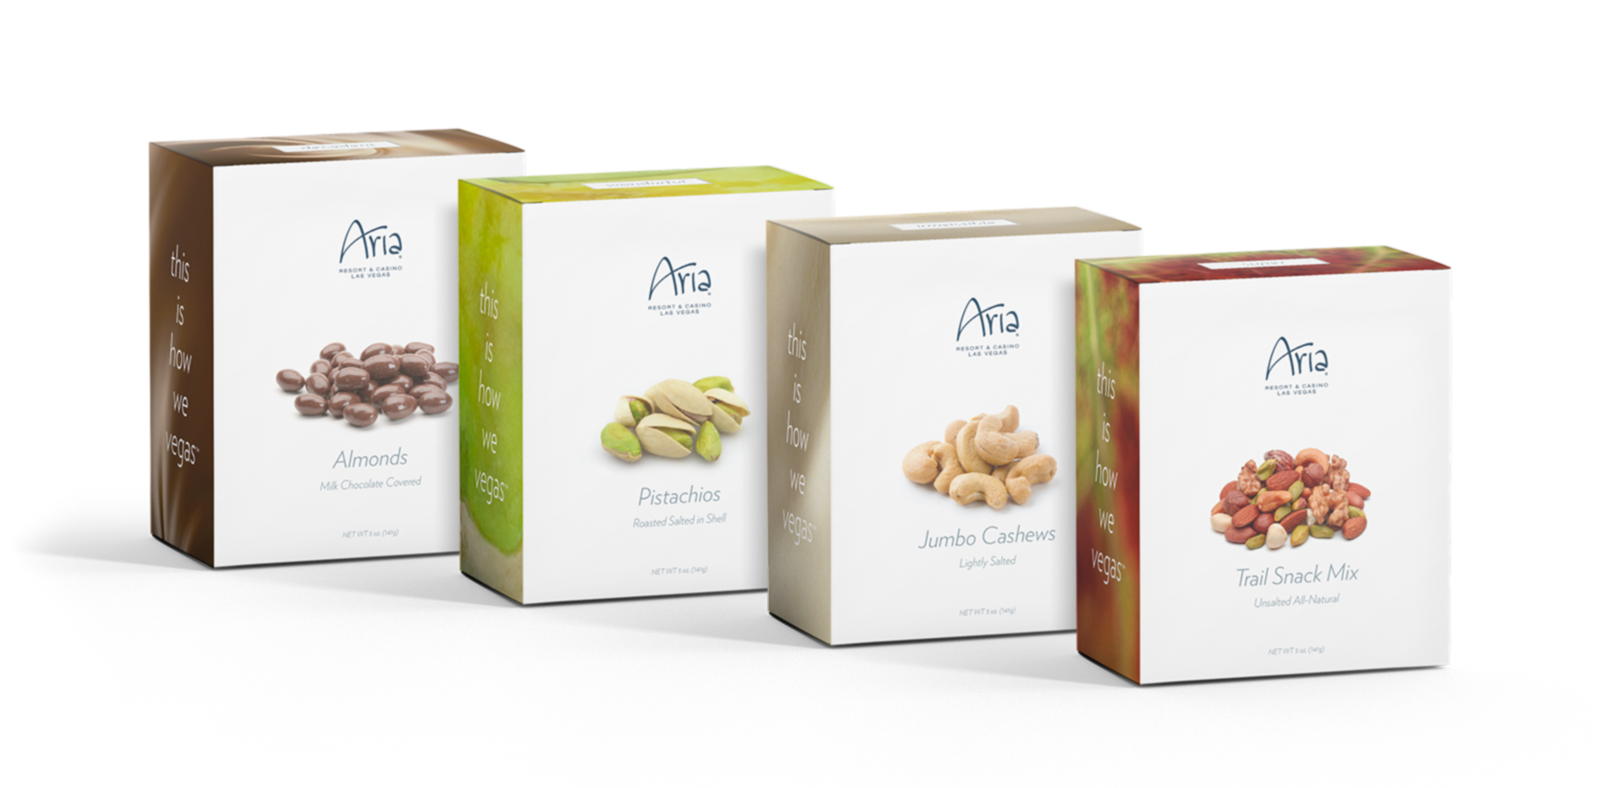 ARIA Resort and Casino Sky Suites snack bar packaging design by Silky Szeto